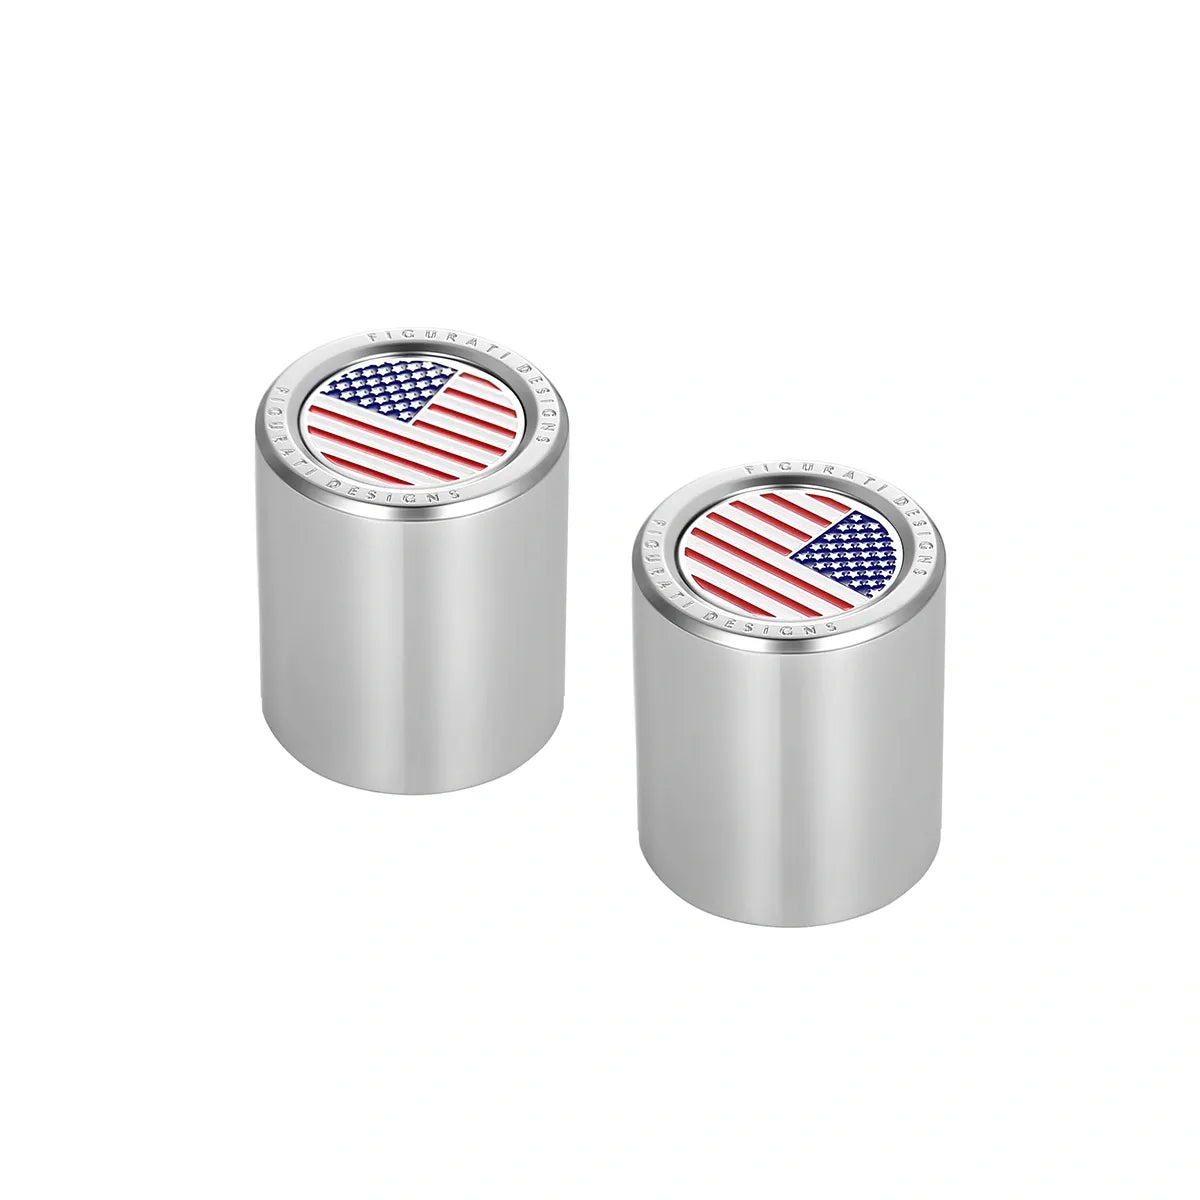 Harley-Davidson Stainless-Steel Red White & Blue American Flag Docking Covers